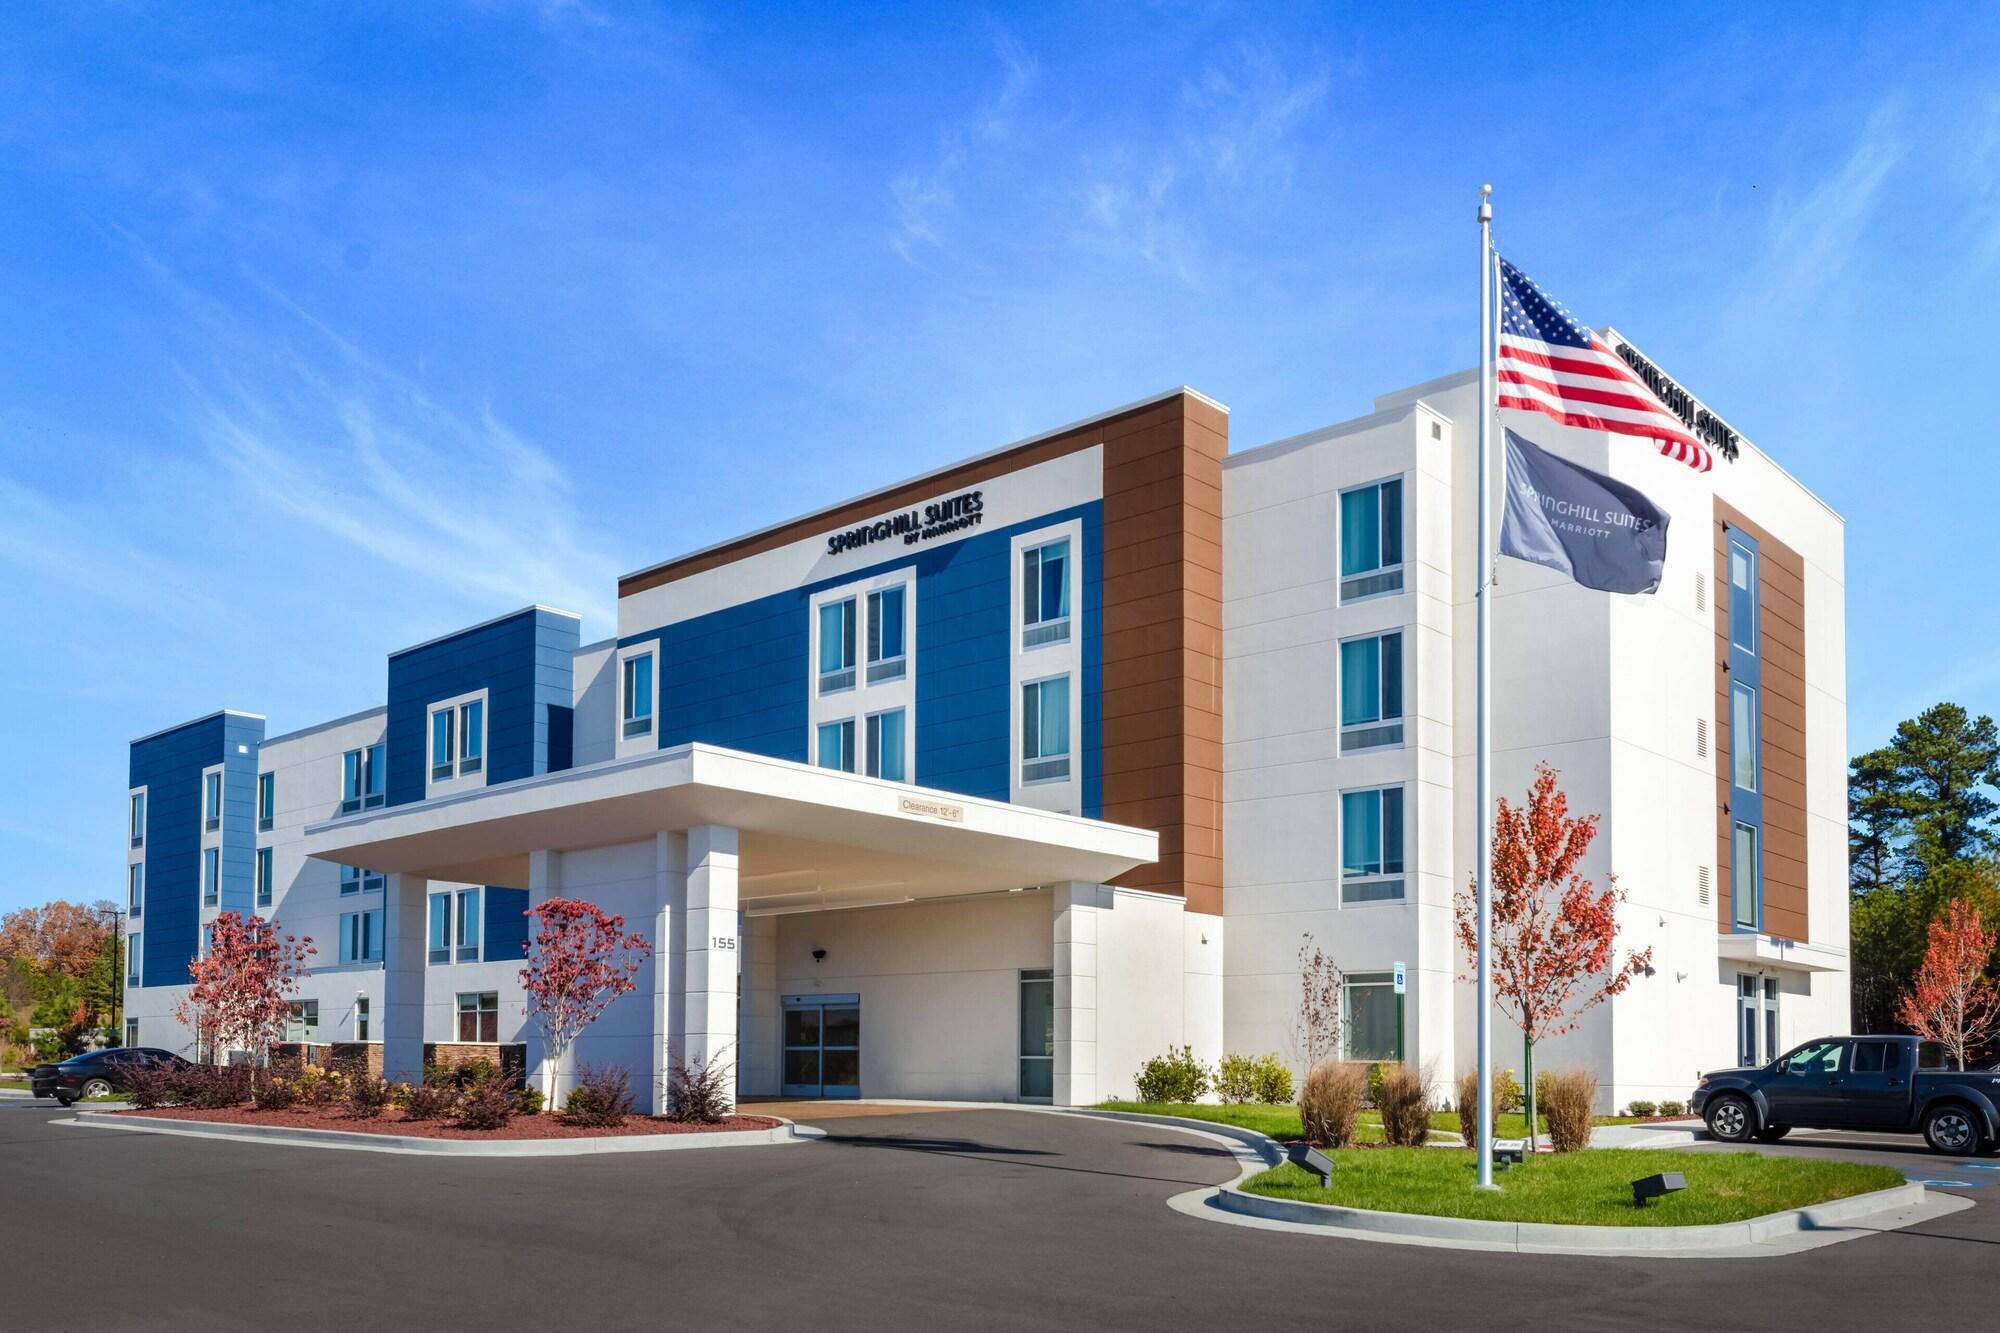 SpringHill Suites by Marriott Chattanooga South/Ringgold, GA image